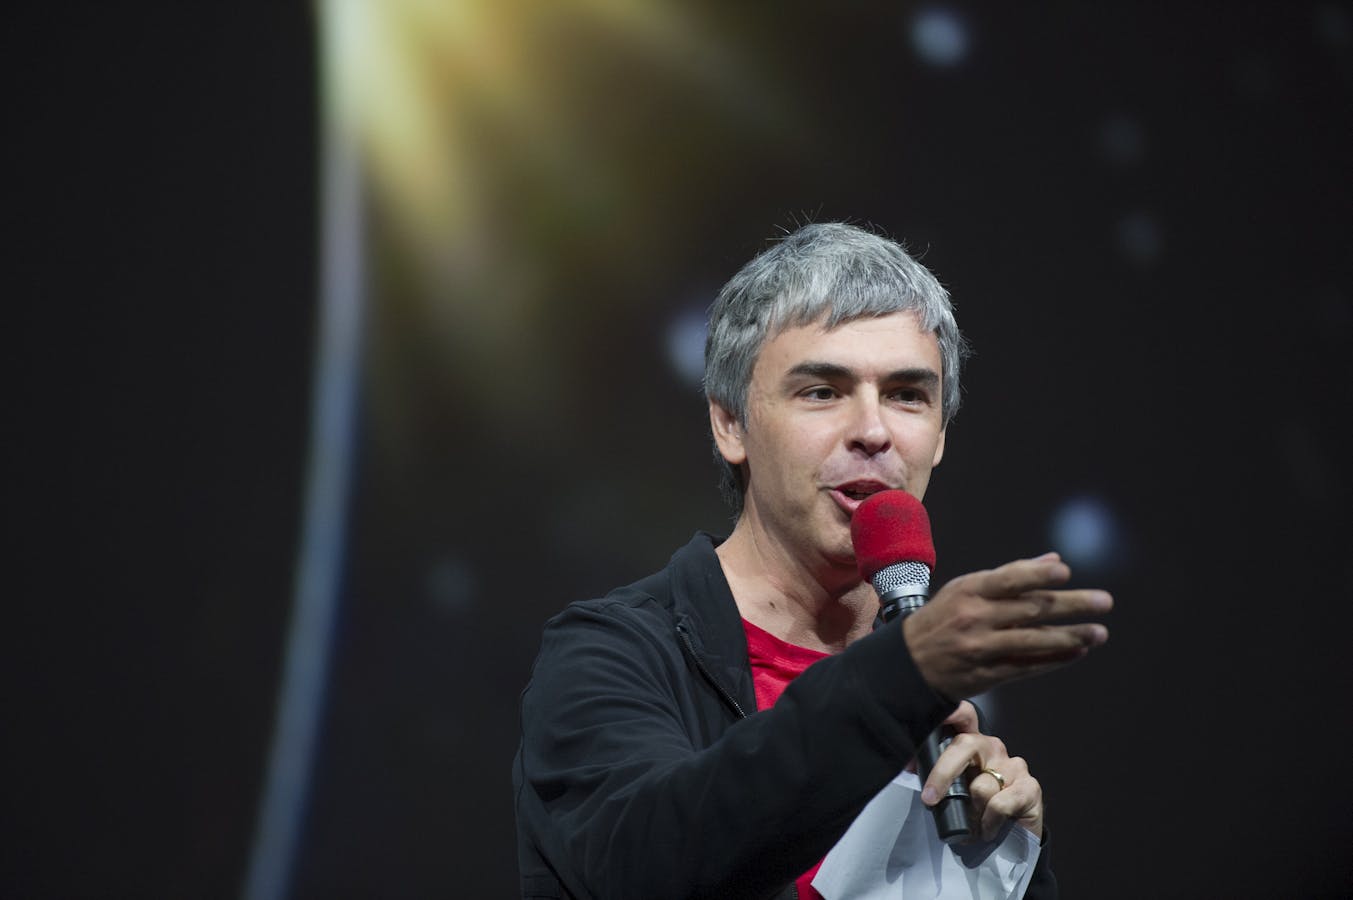 Google CEO Larry Page. Photo by Bloomberg.